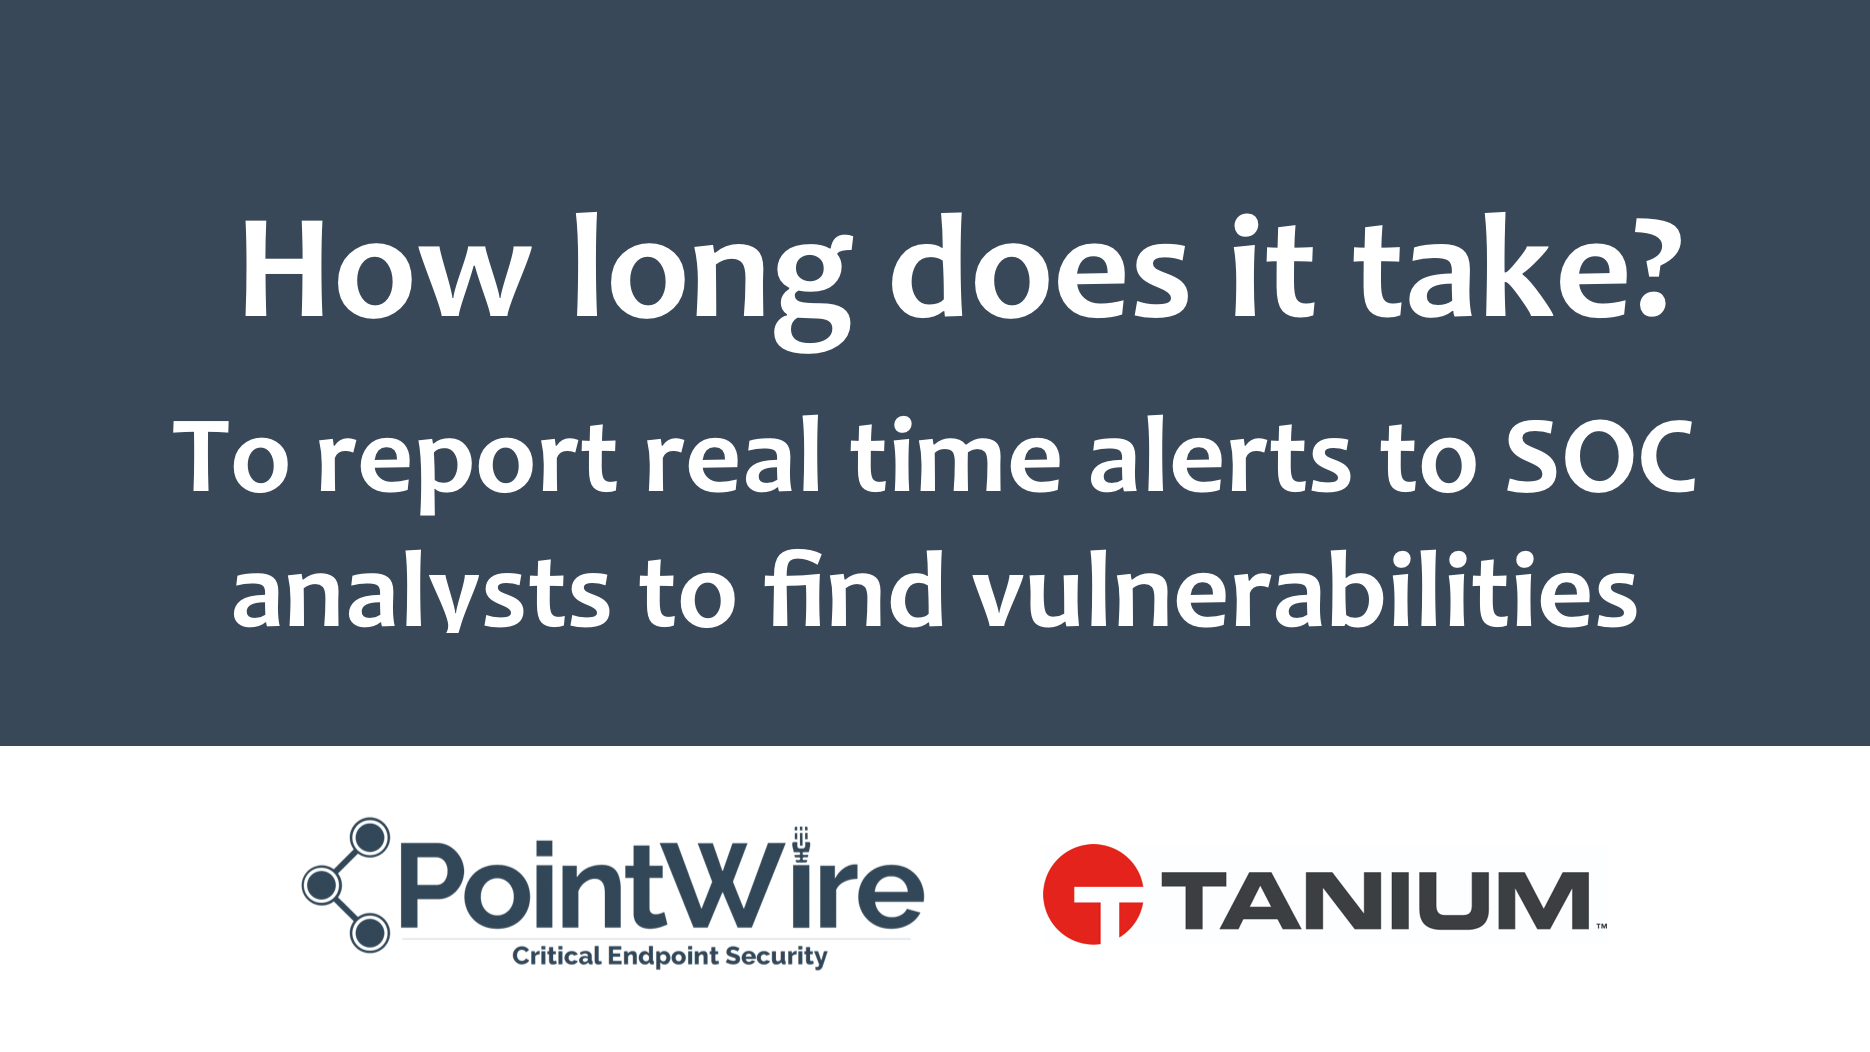 How long does it take? To report real time alerts to SOC analysts